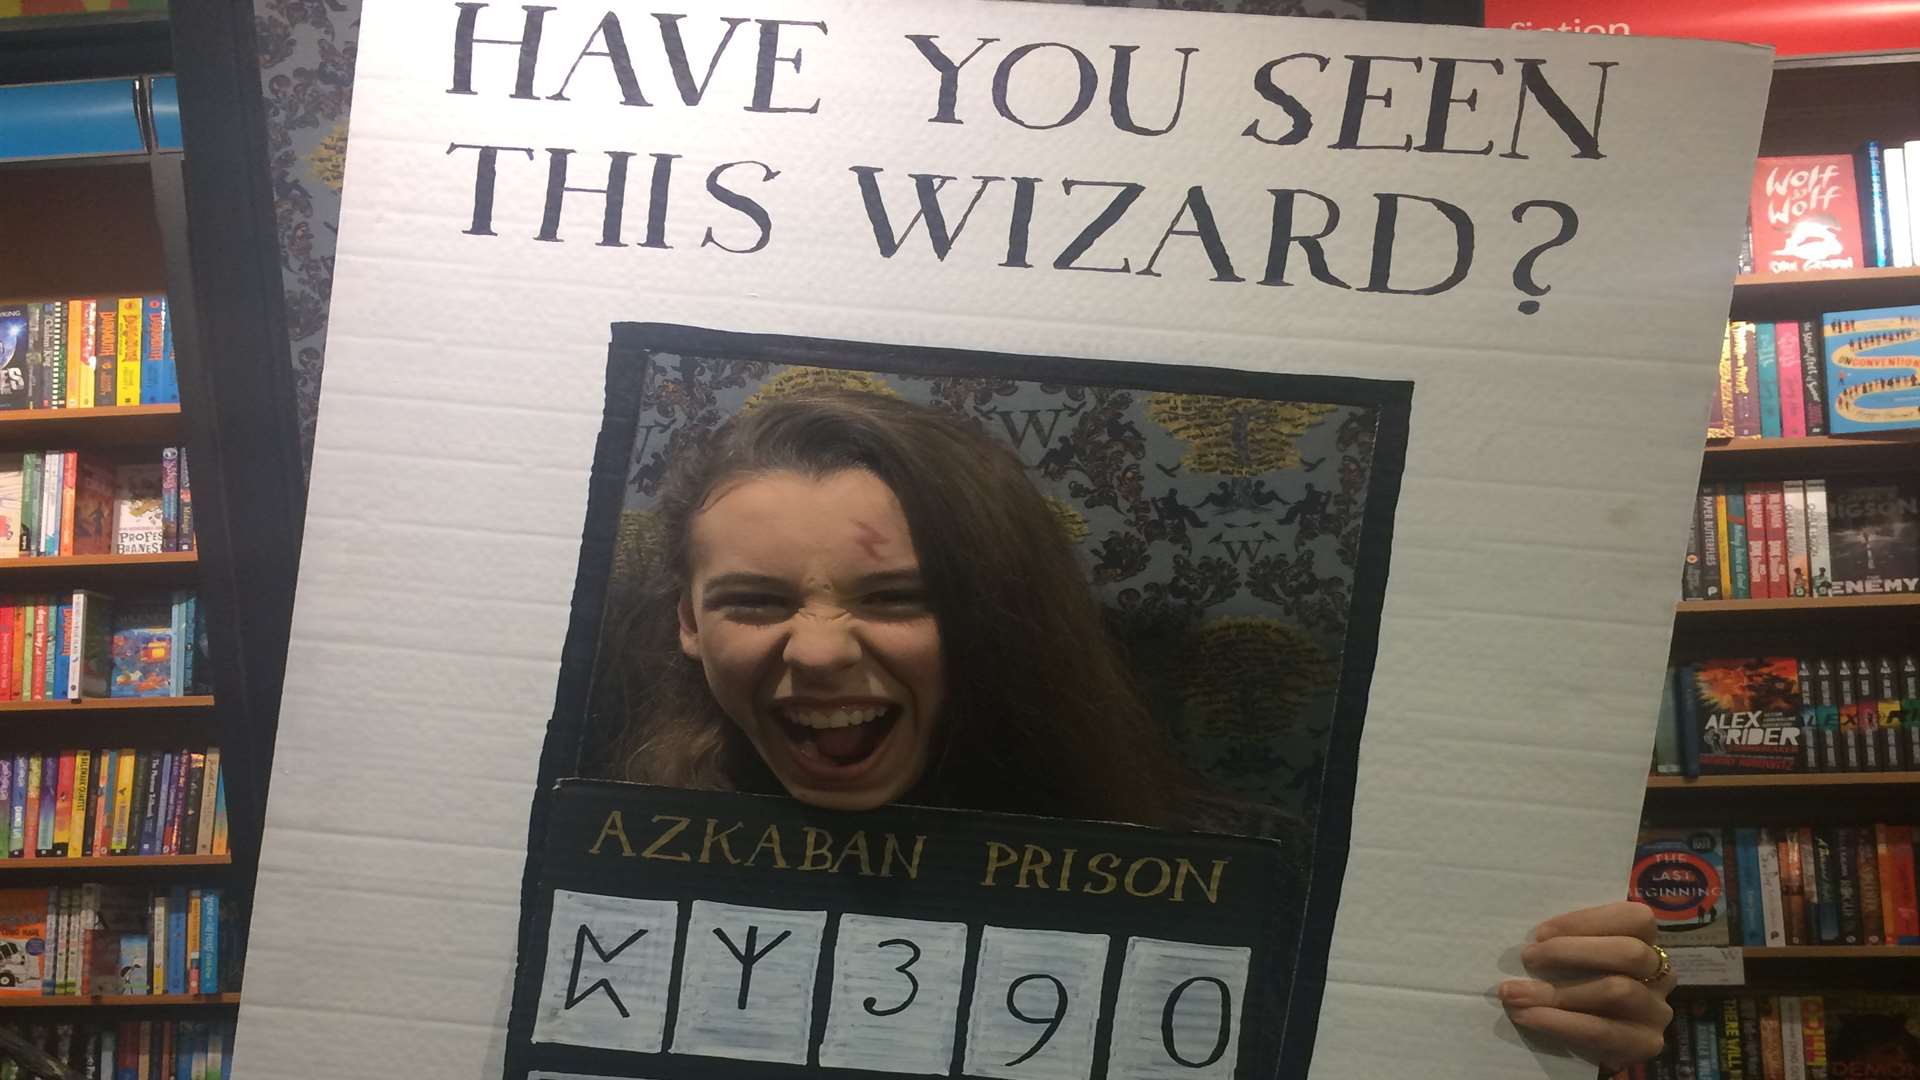 Ella Phibbs, age 12, has escaped from Azkaban. Have you seen her?